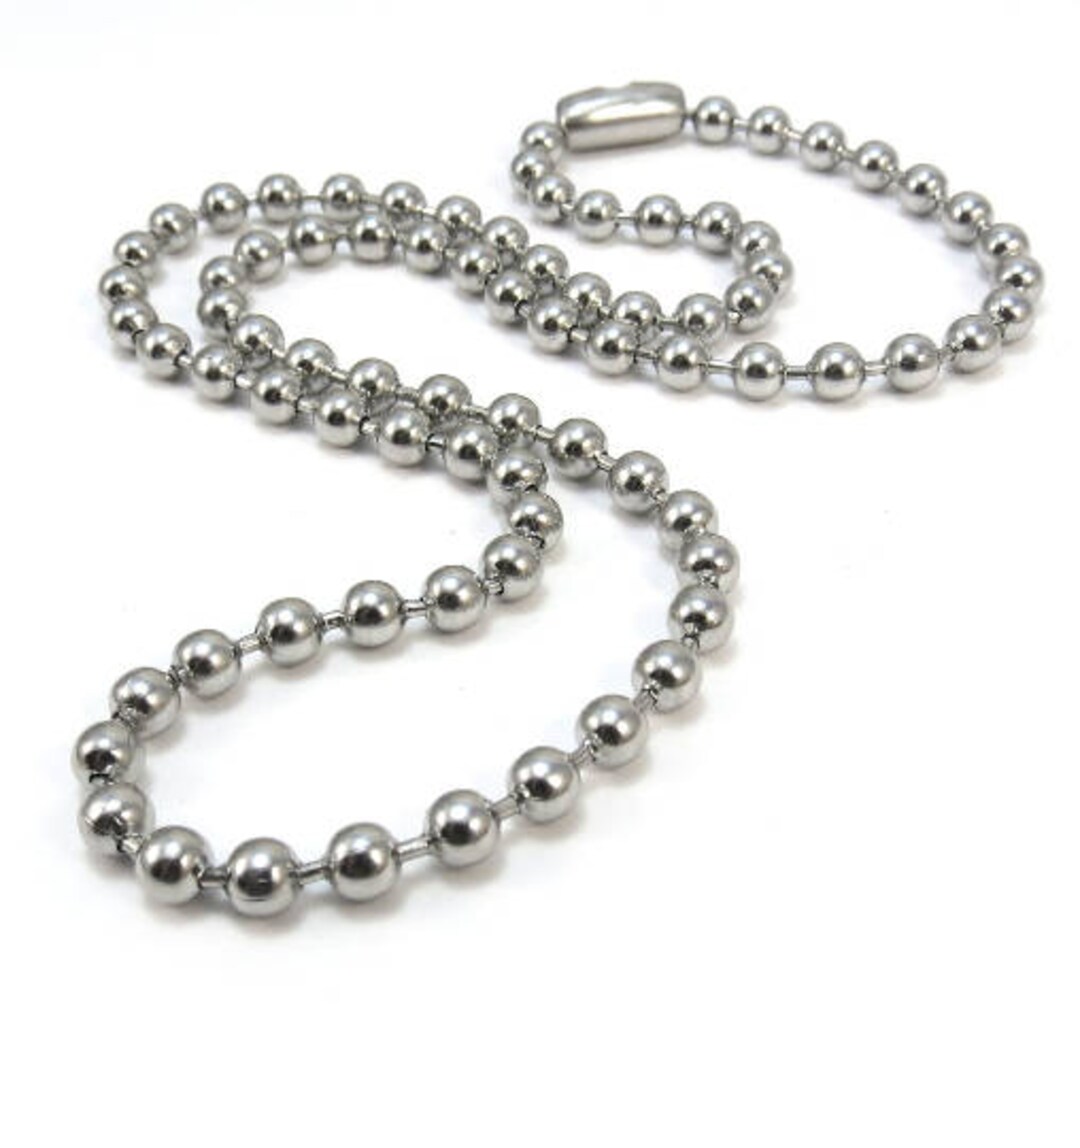 Ball Chain Necklace, 4.5mm Stainless Steel Chain, Custom Length Necklace,  Item 1586ch 